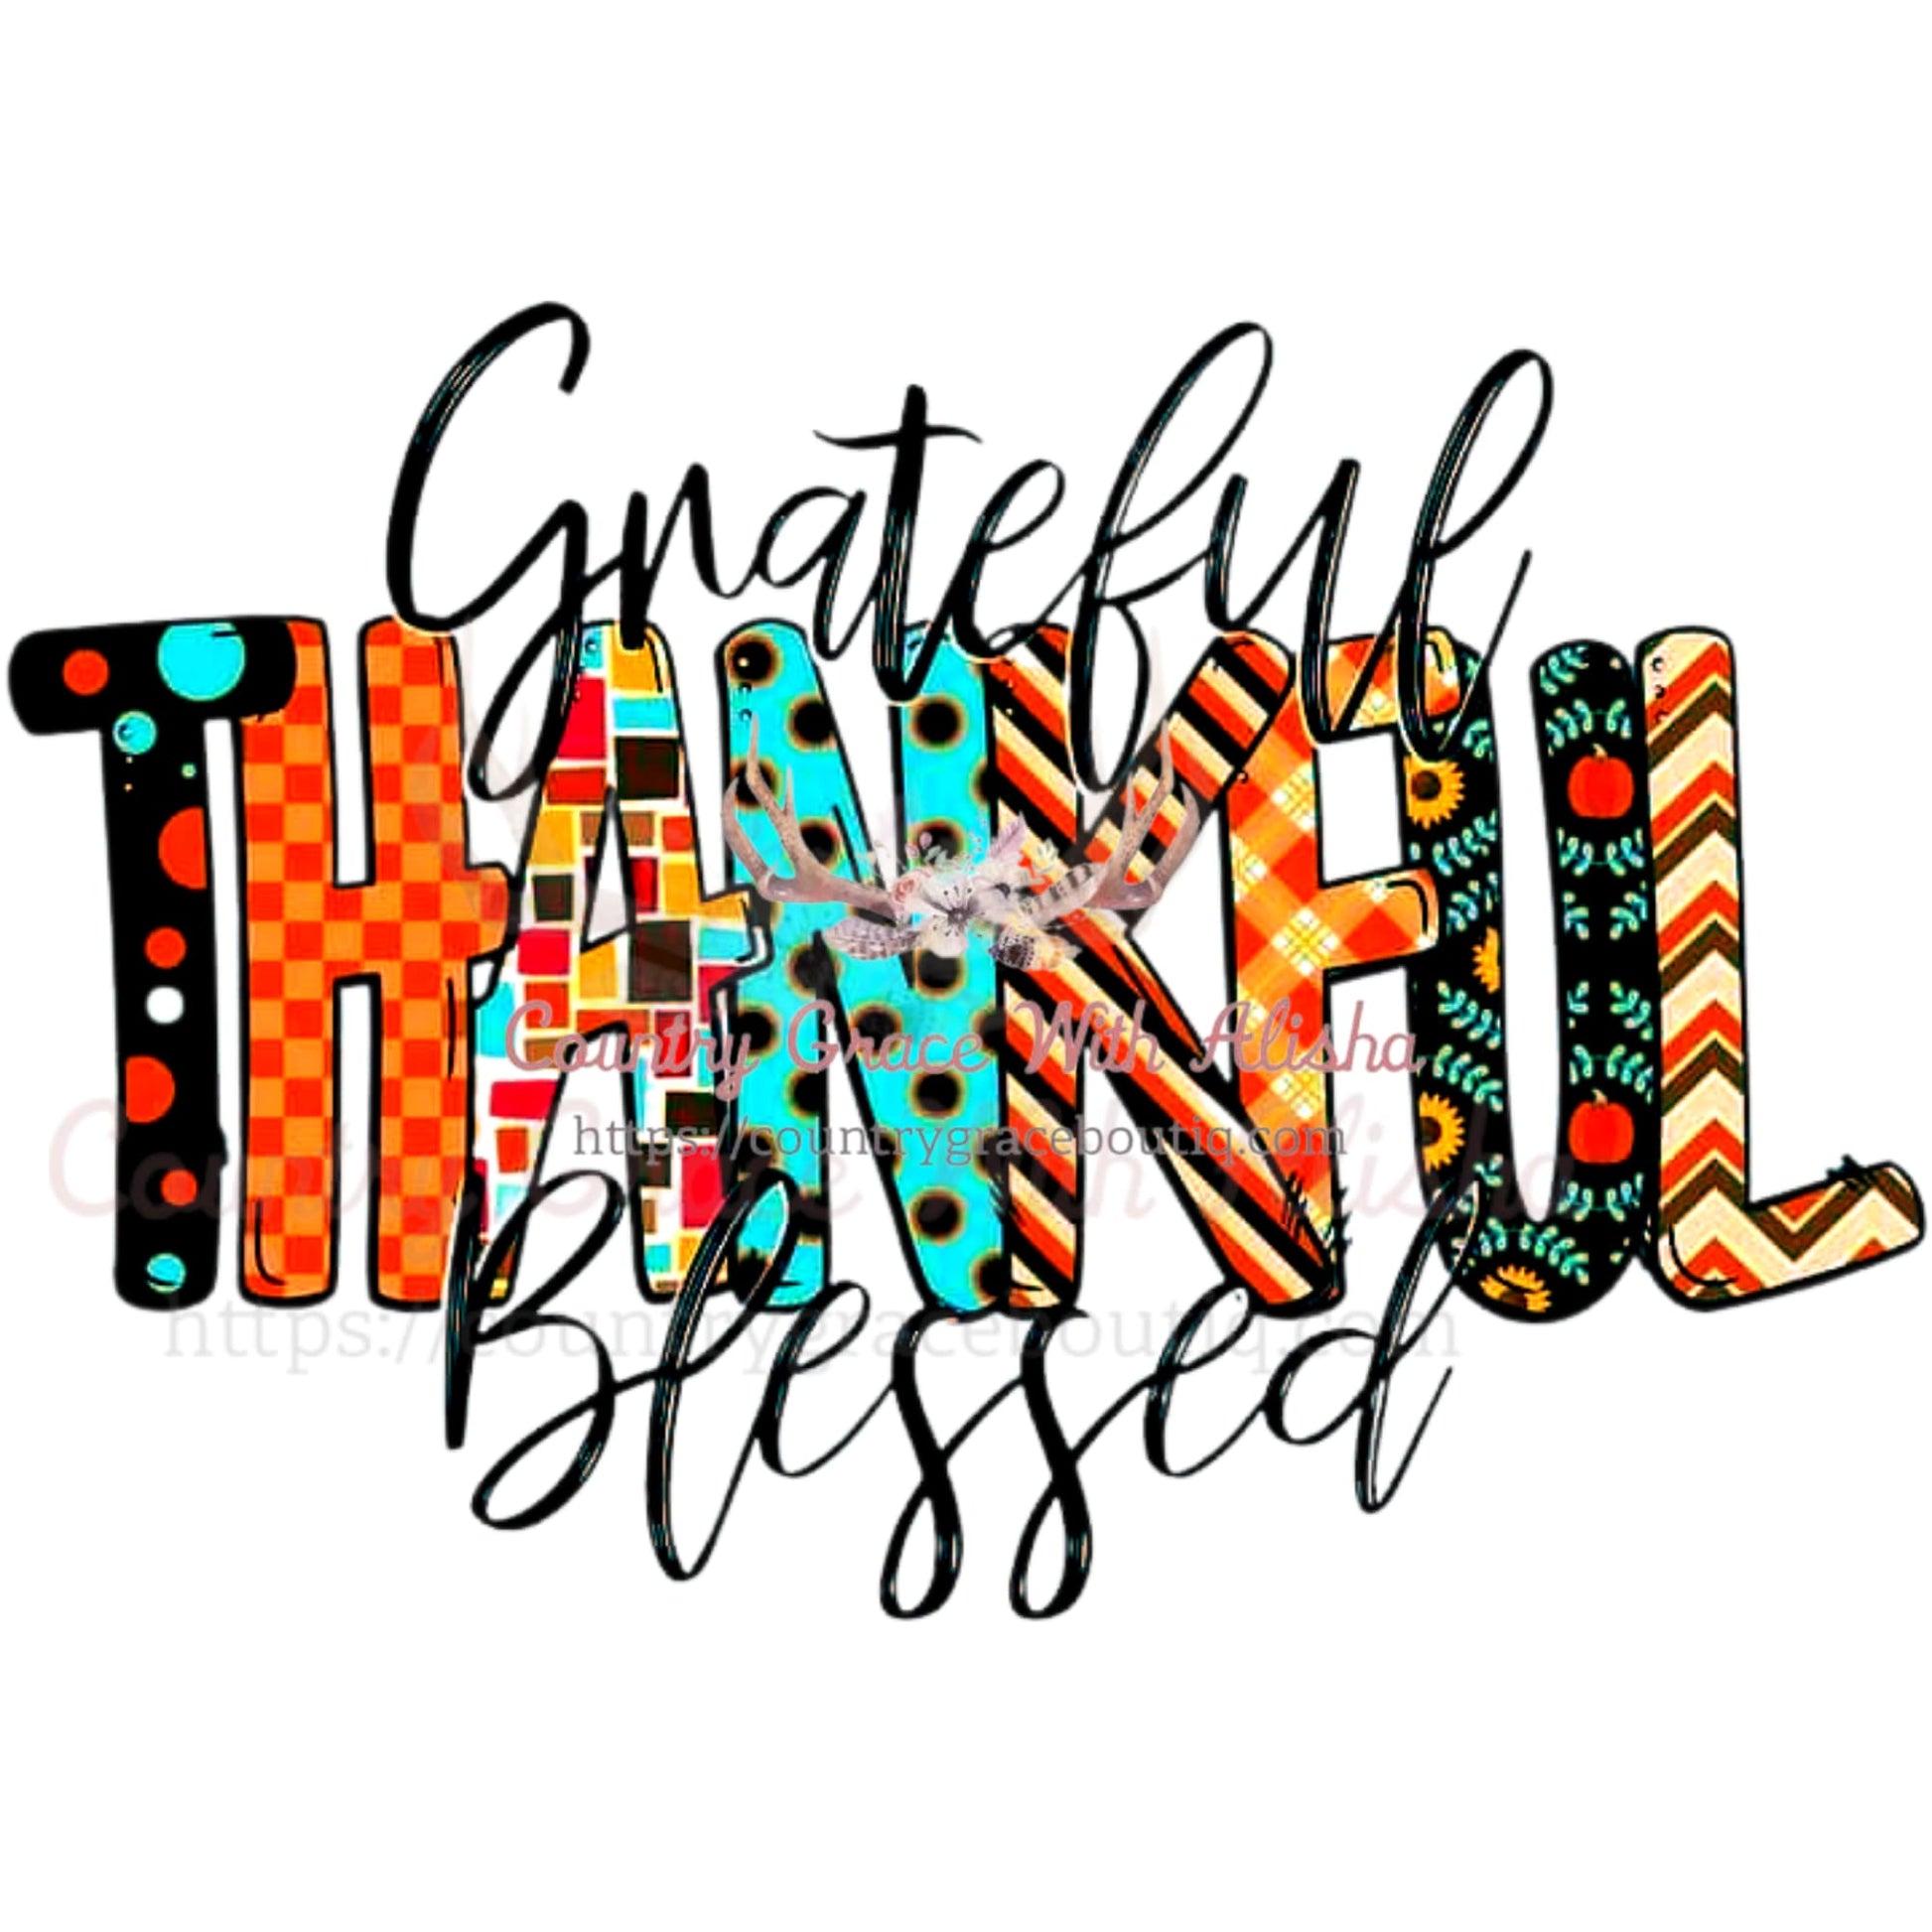 Grateful Thankful Blessed Sublimation Transfer - Sub $1.50 